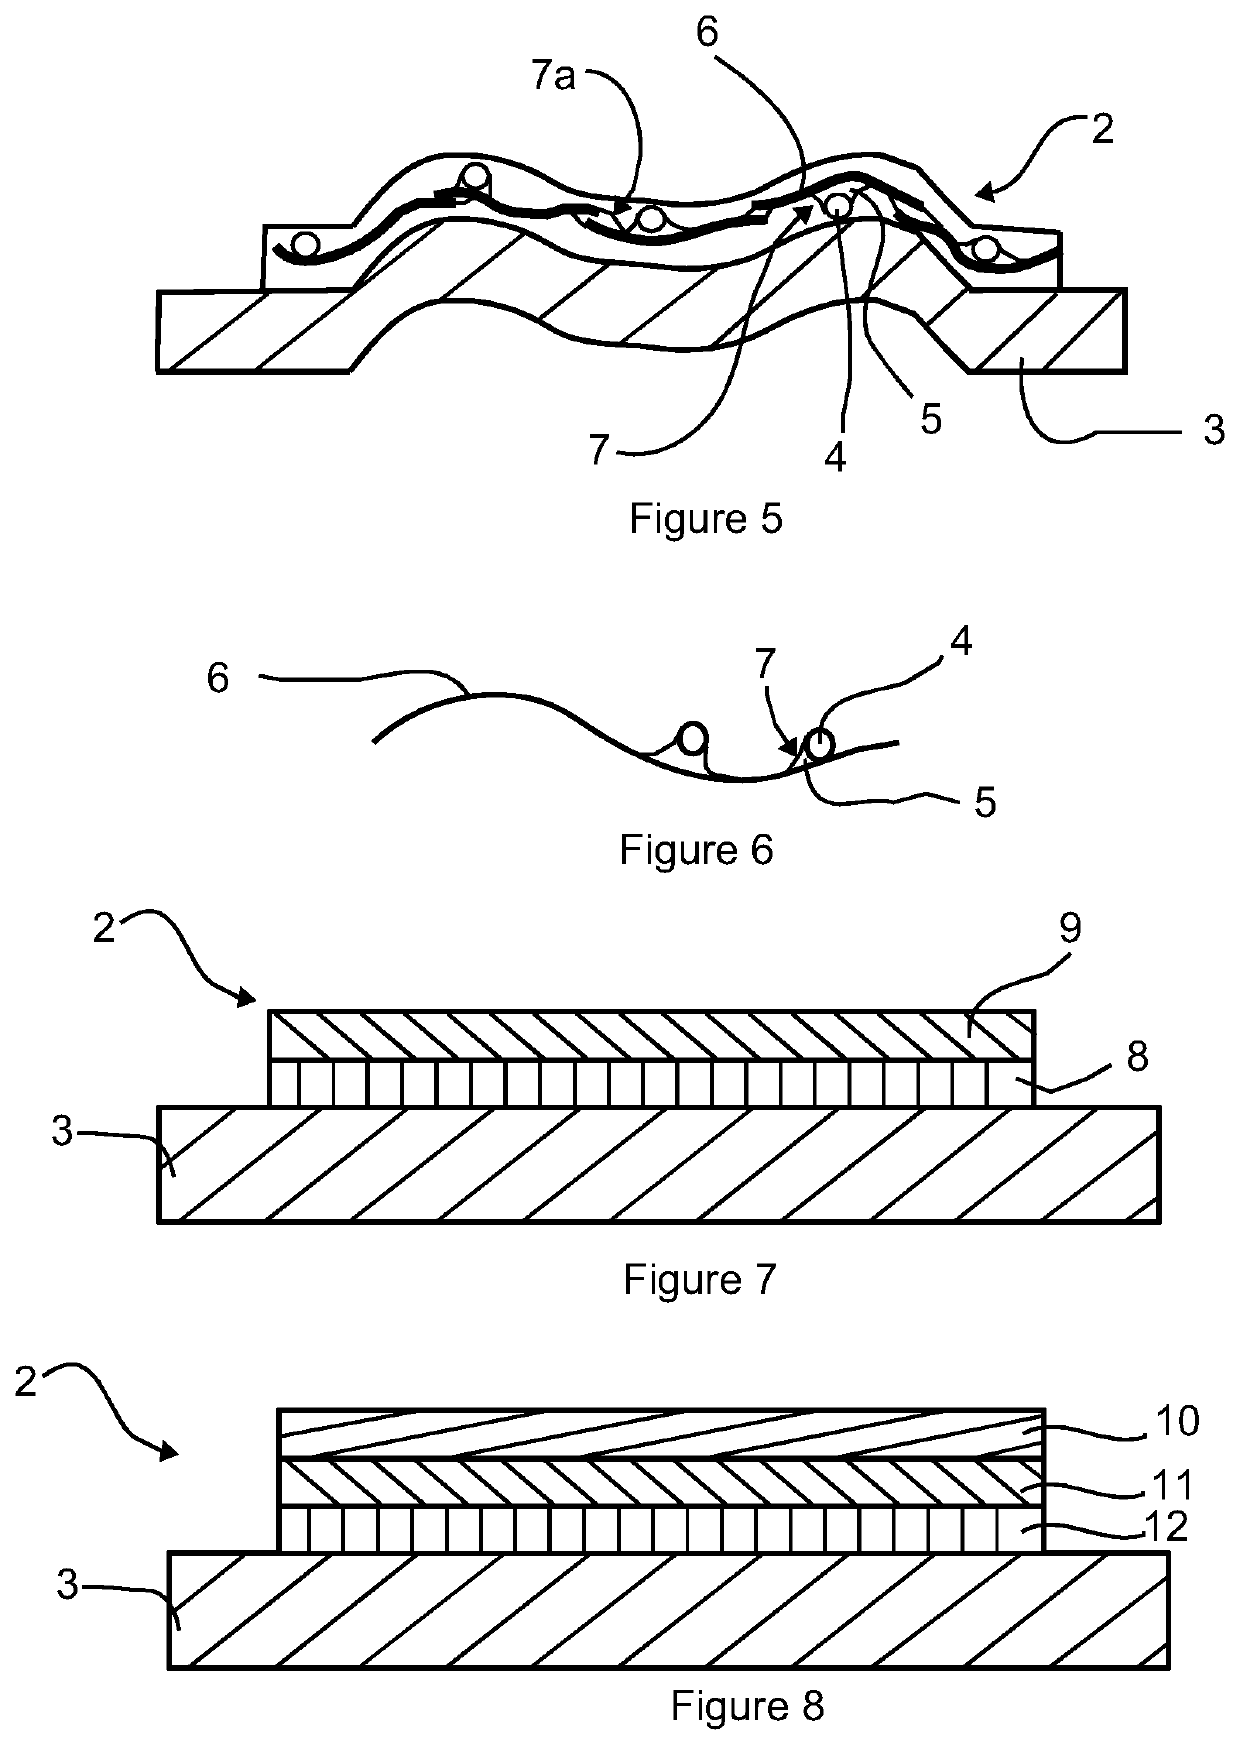 Device having a substrate configured to be thermoformed coupled to an electrically conductive member